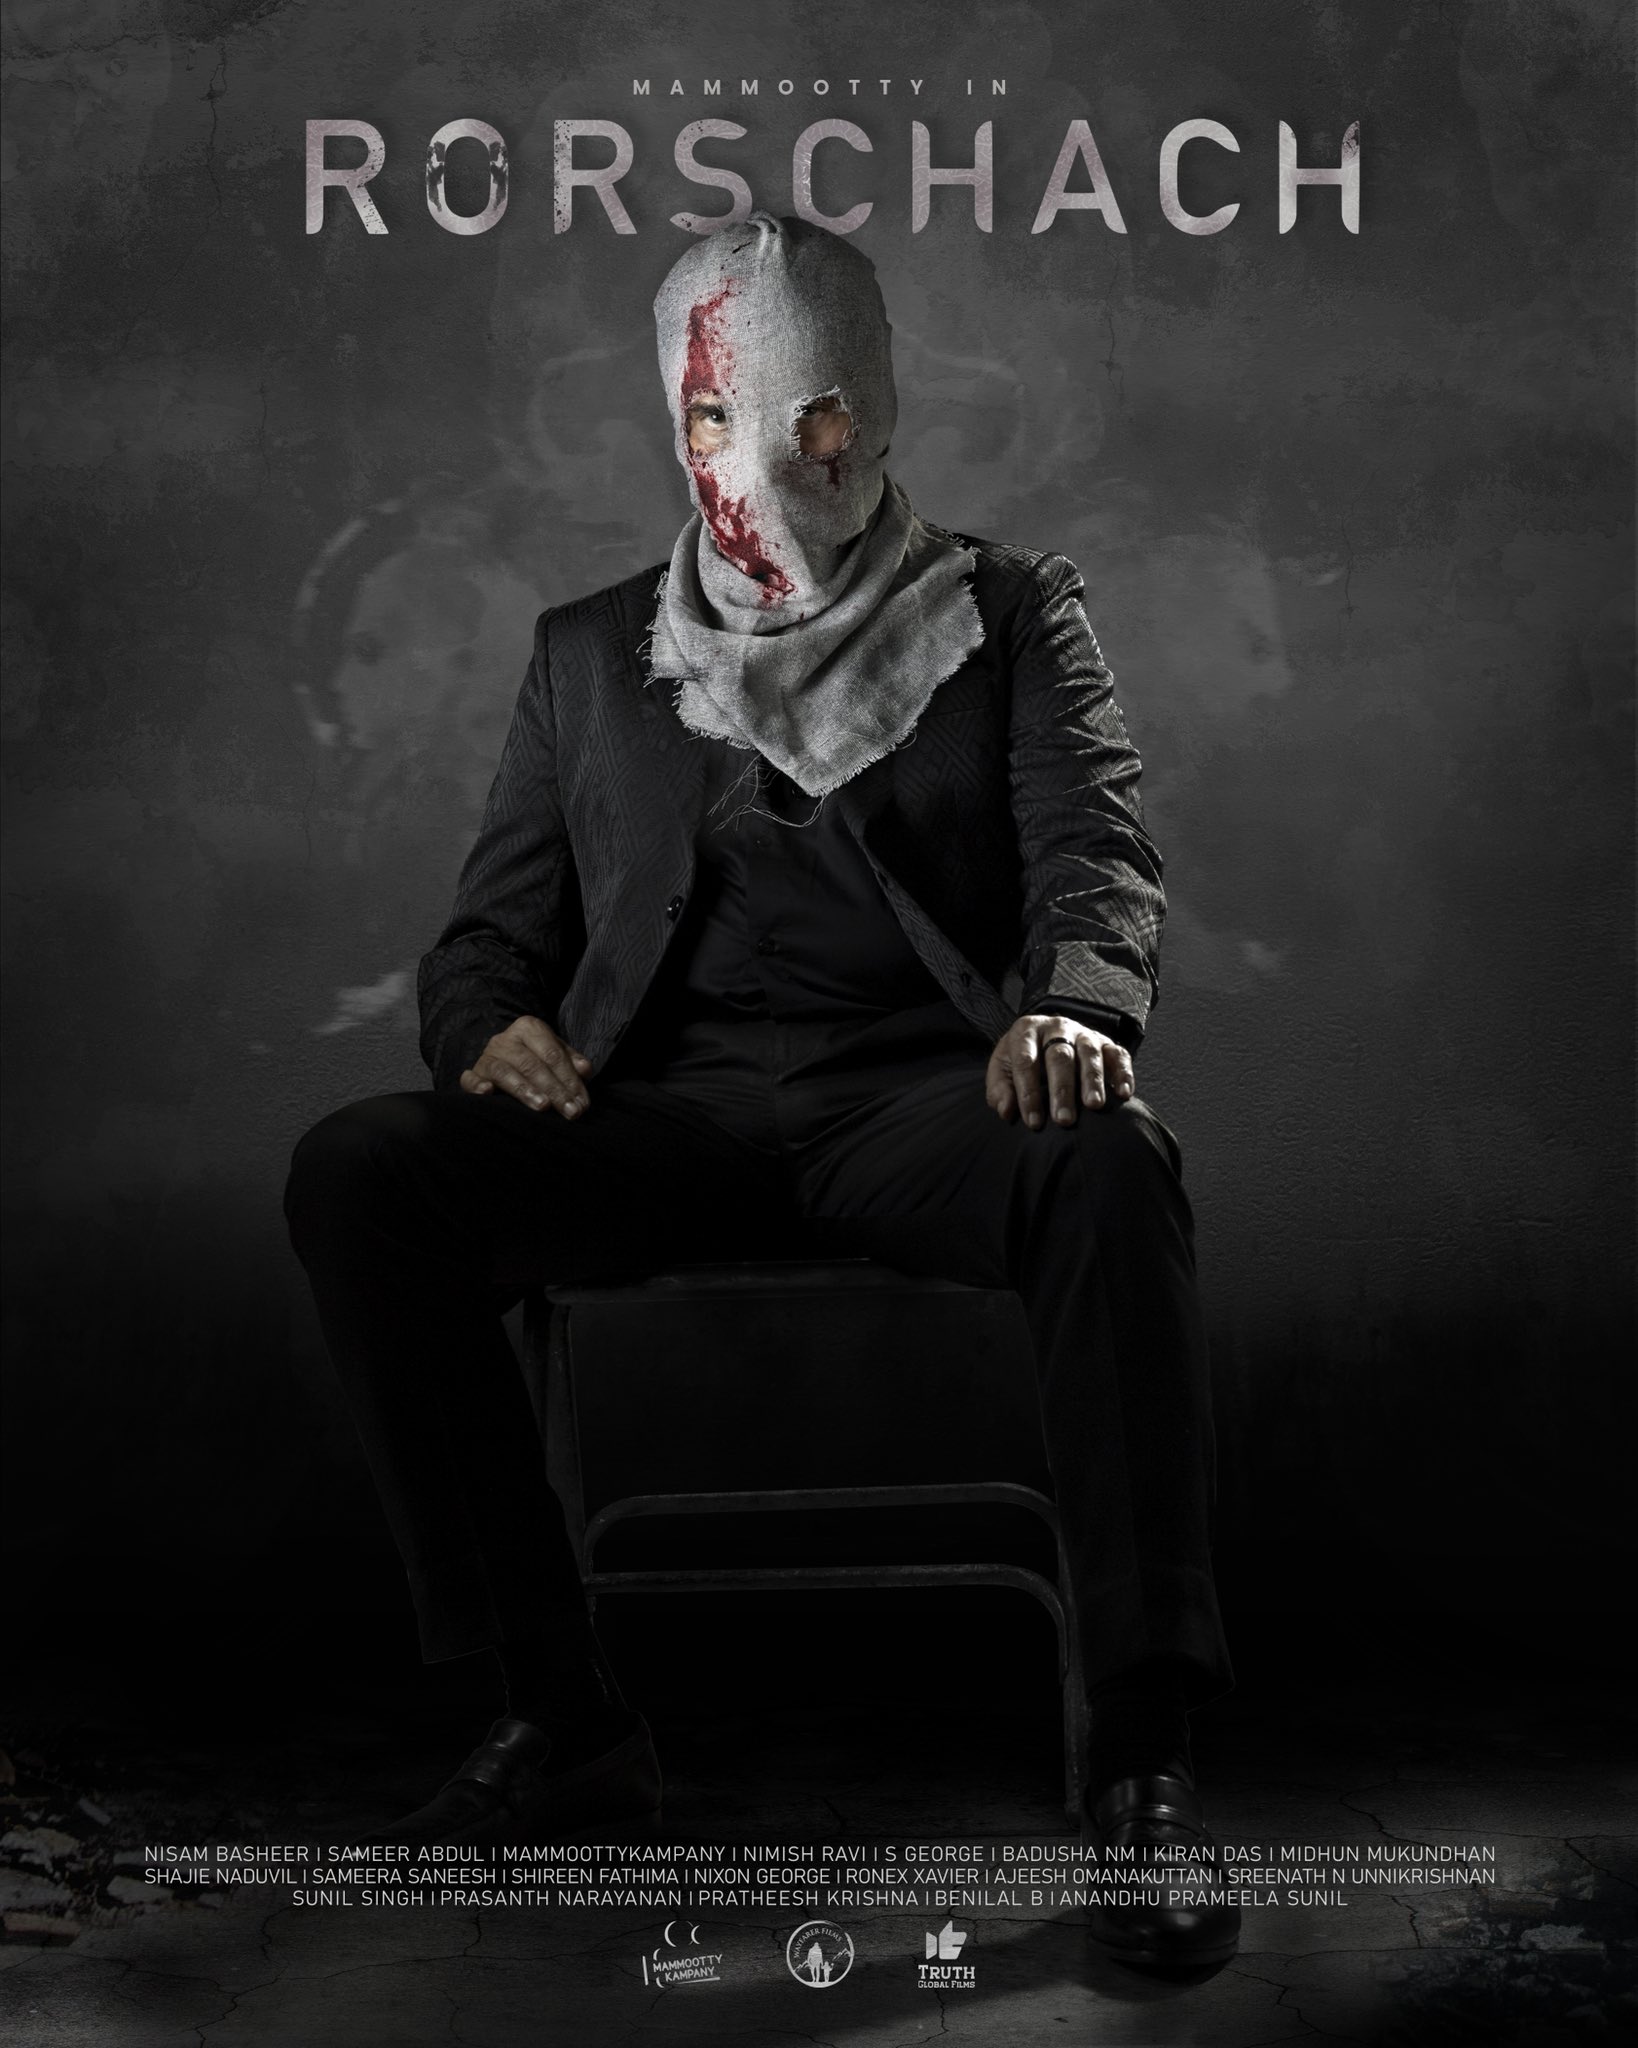 Rorschach movie hd posters